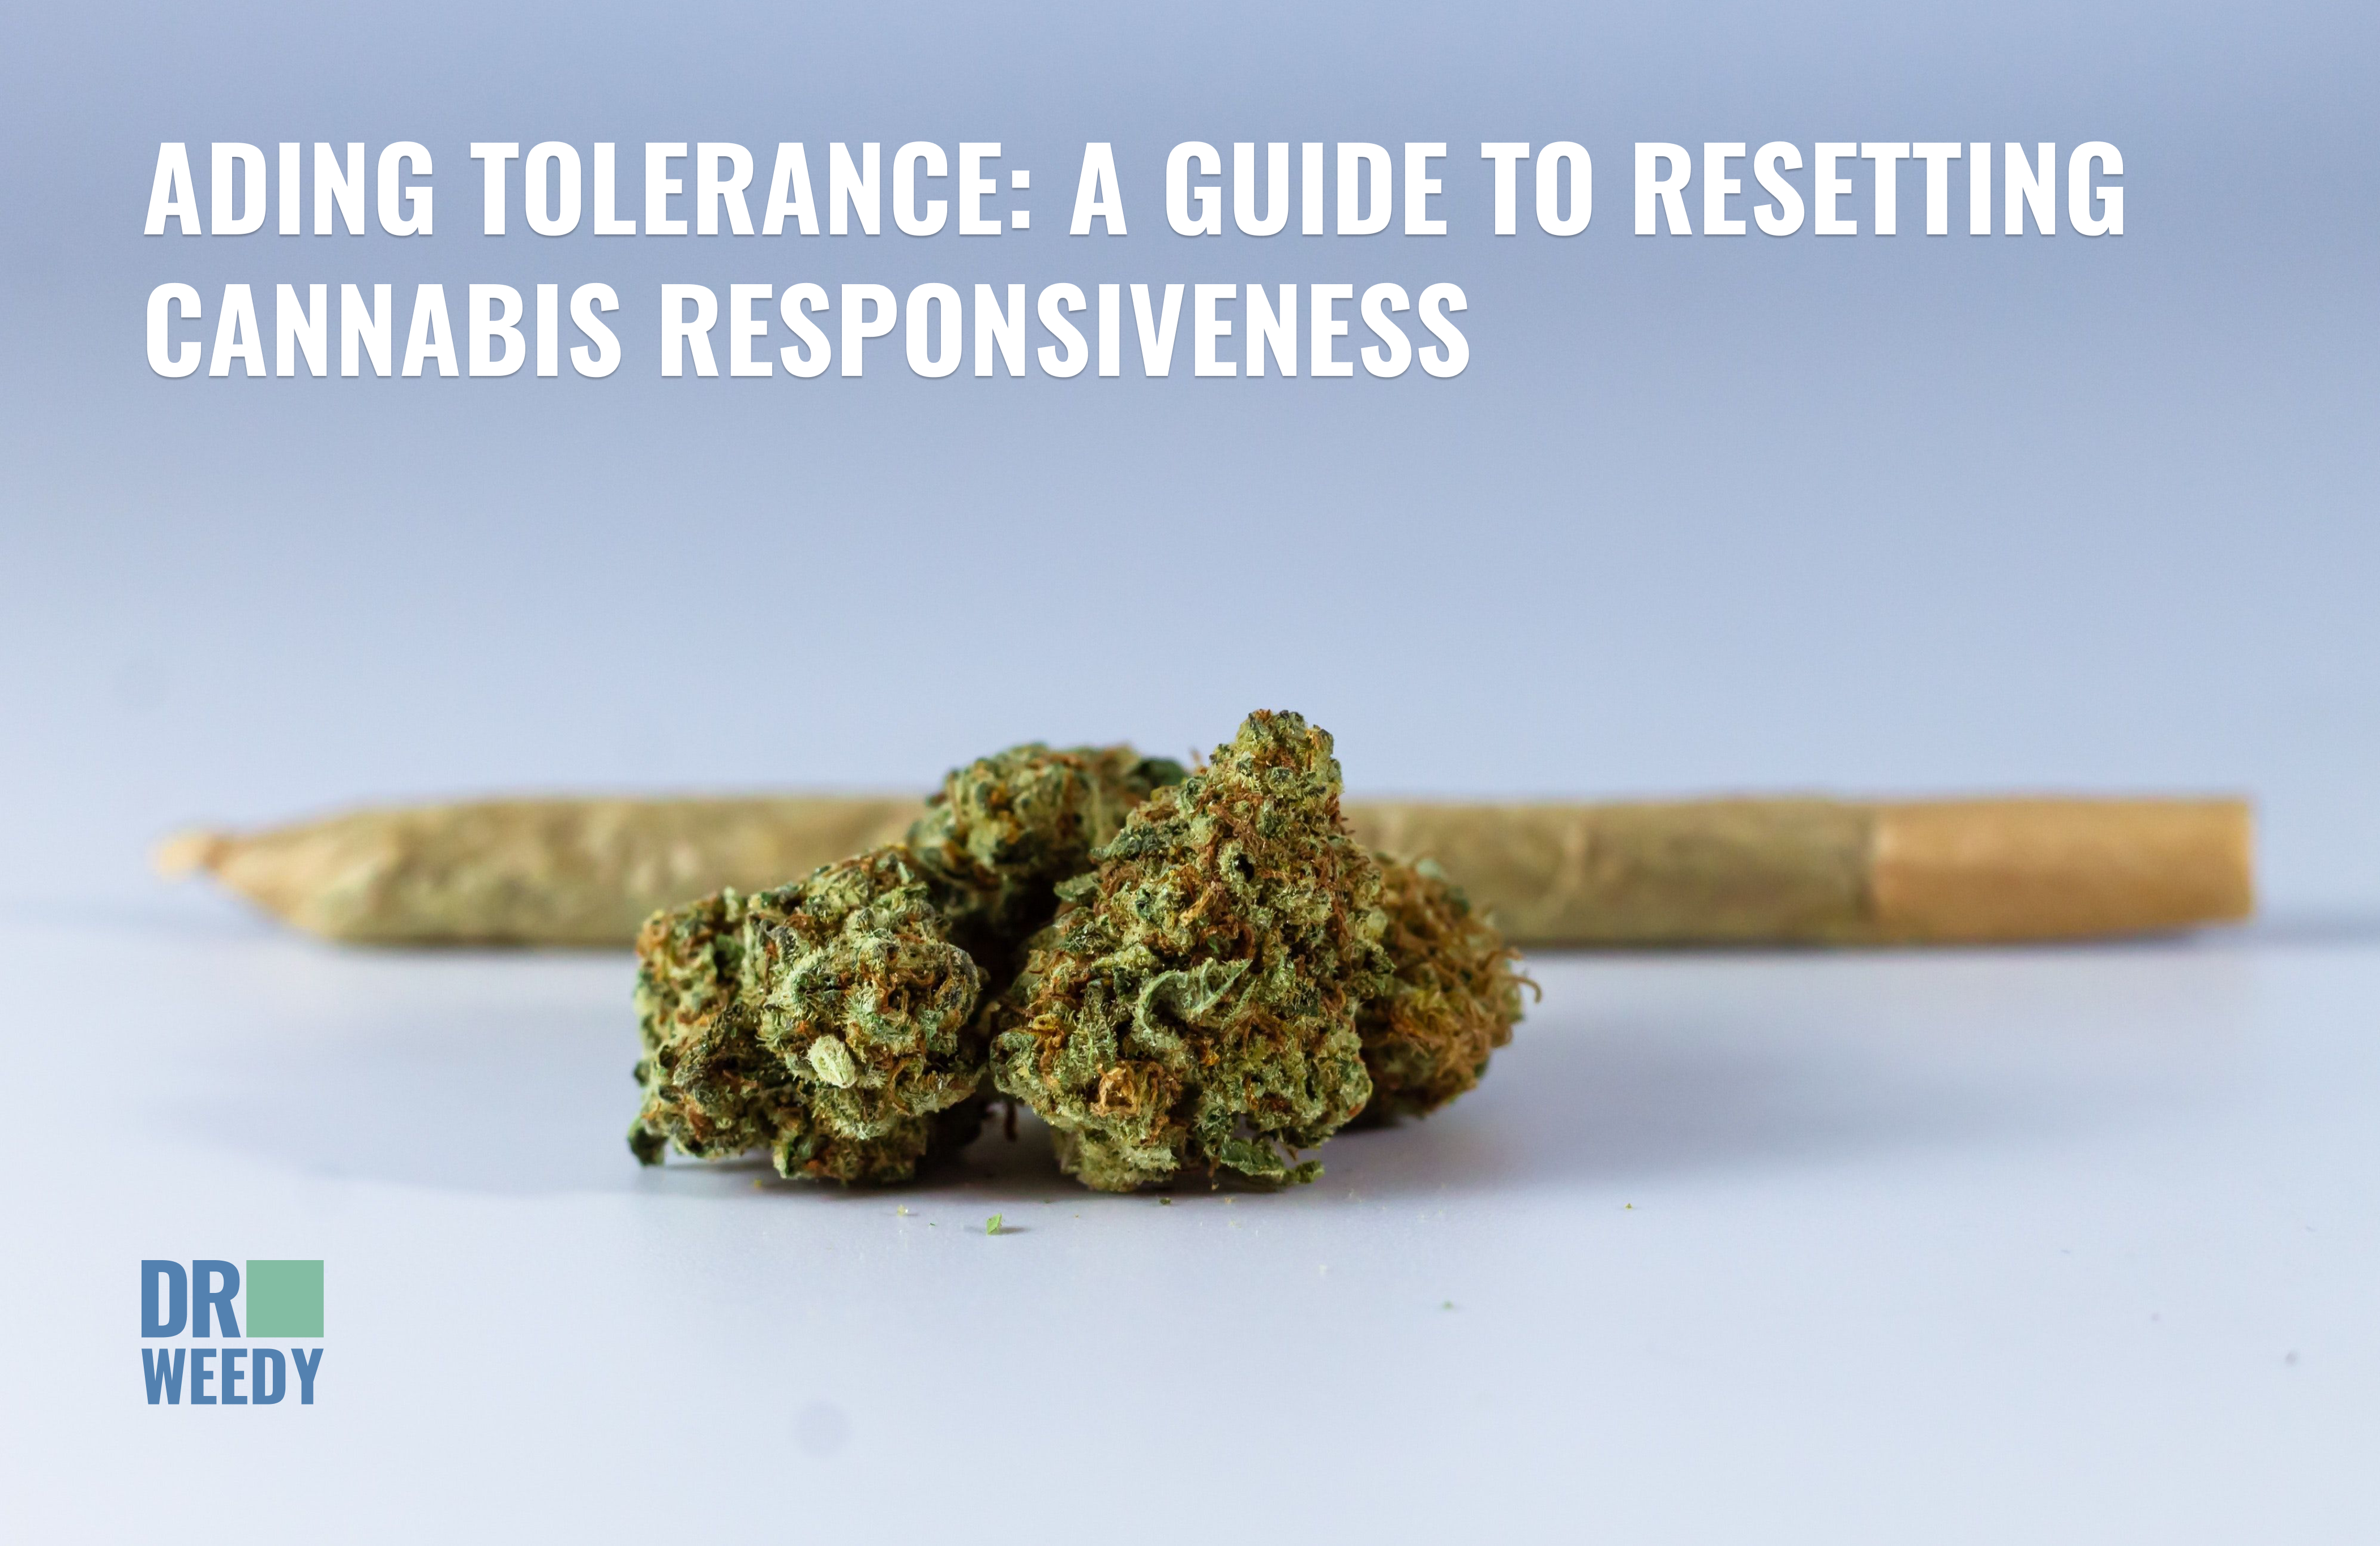 Fading Tolerance: A Guide to Resetting Cannabis Responsiveness